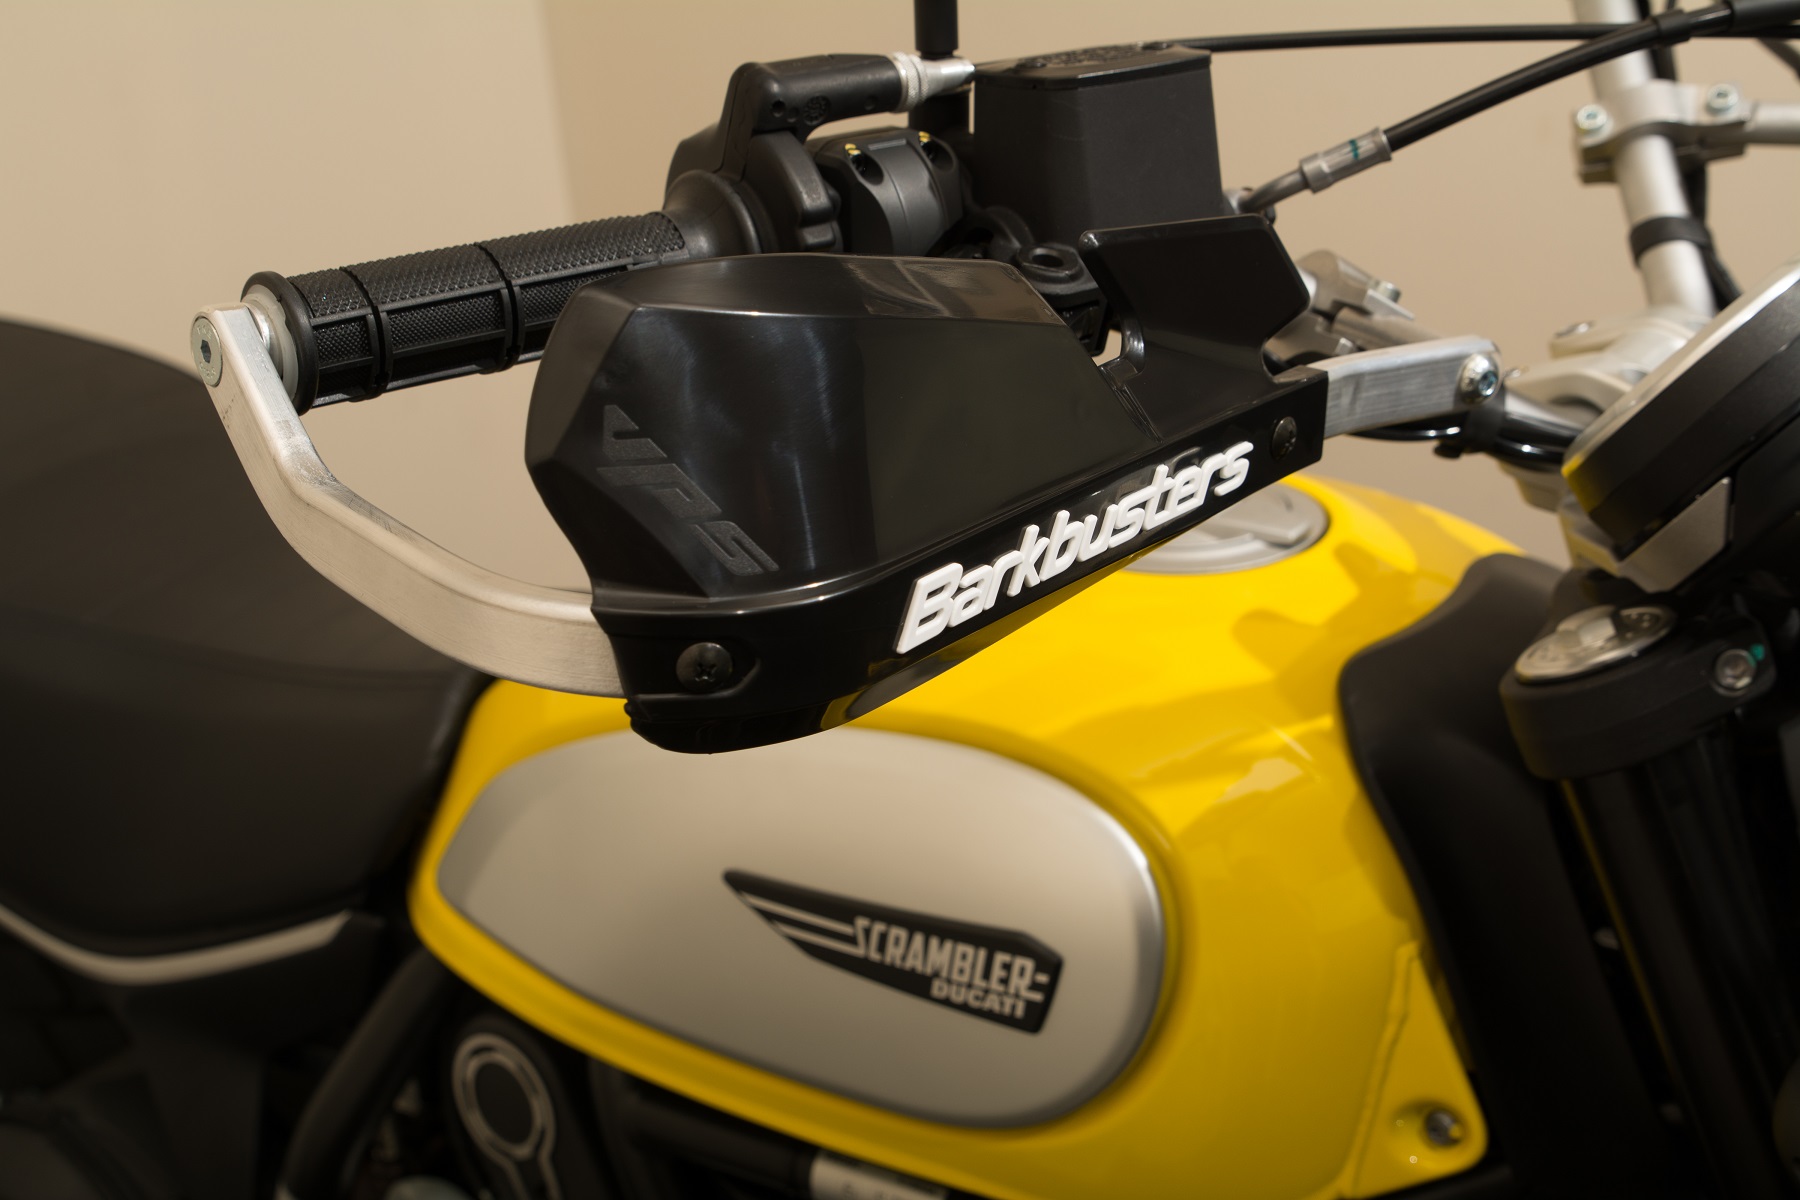 BARKBUSTERS Handguard Hardware Kit (Code: BHG-060) fitted to DUCATI Scrambler Icon with VPS Guards (Code: VPS-003) sold separately